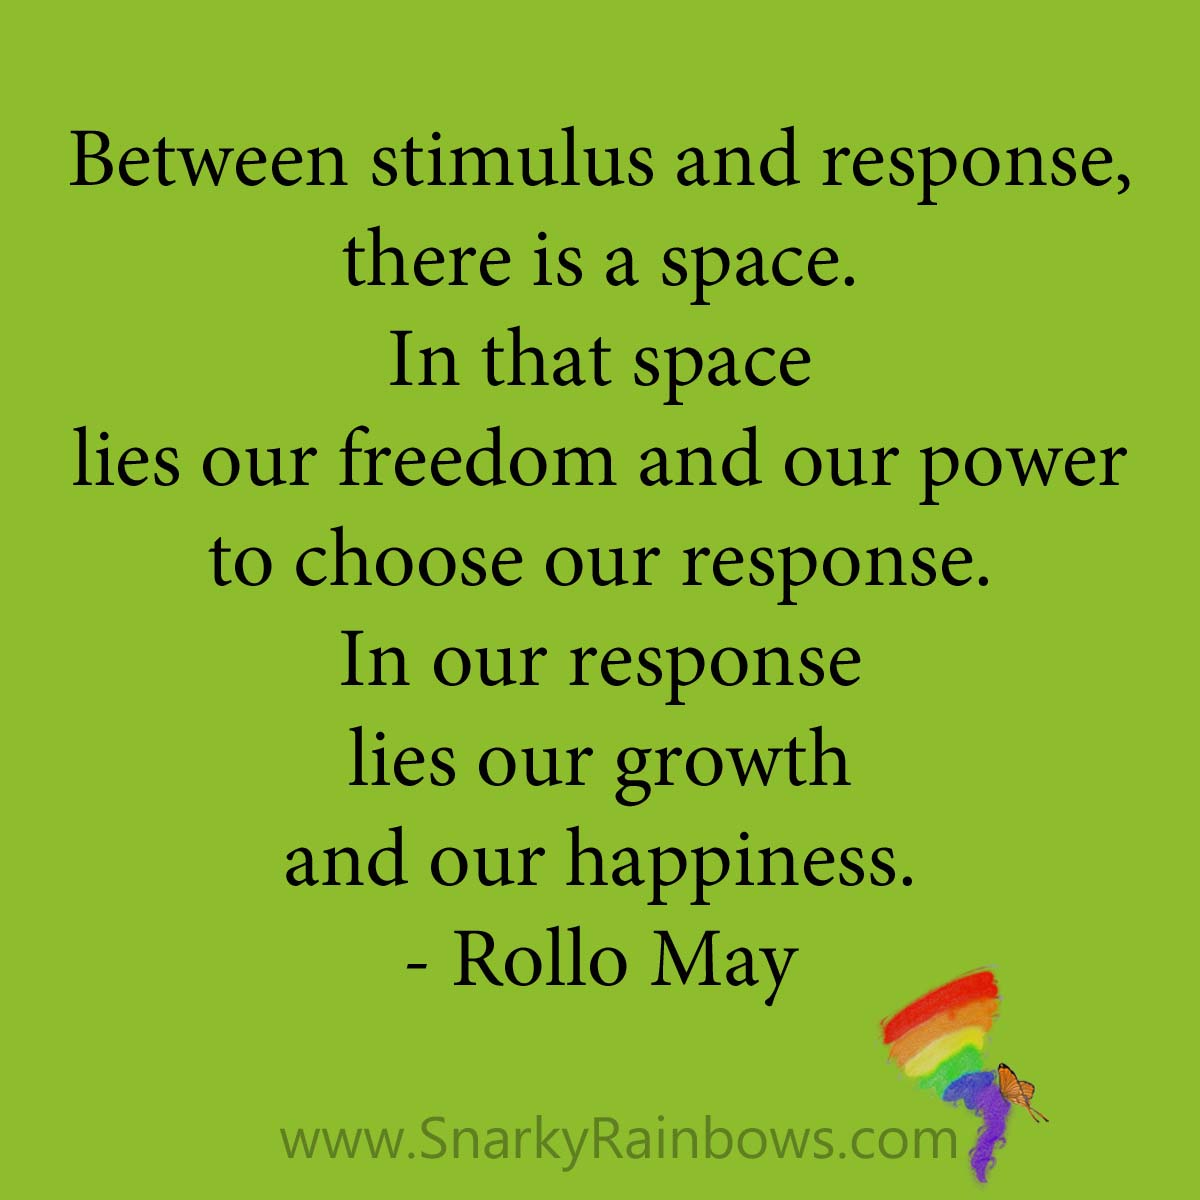 quote - rollo may - between stimulus and response